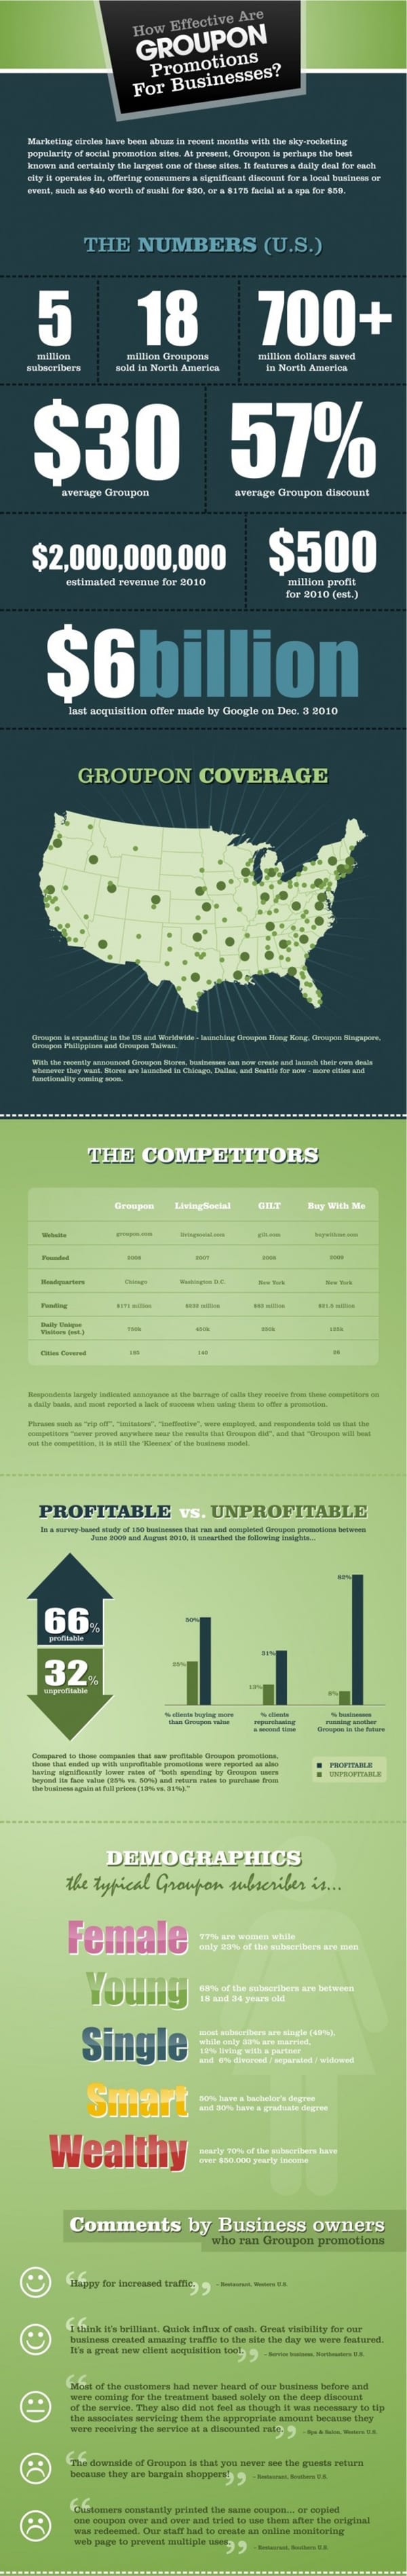 GROUPON-INFOGRAPHIC